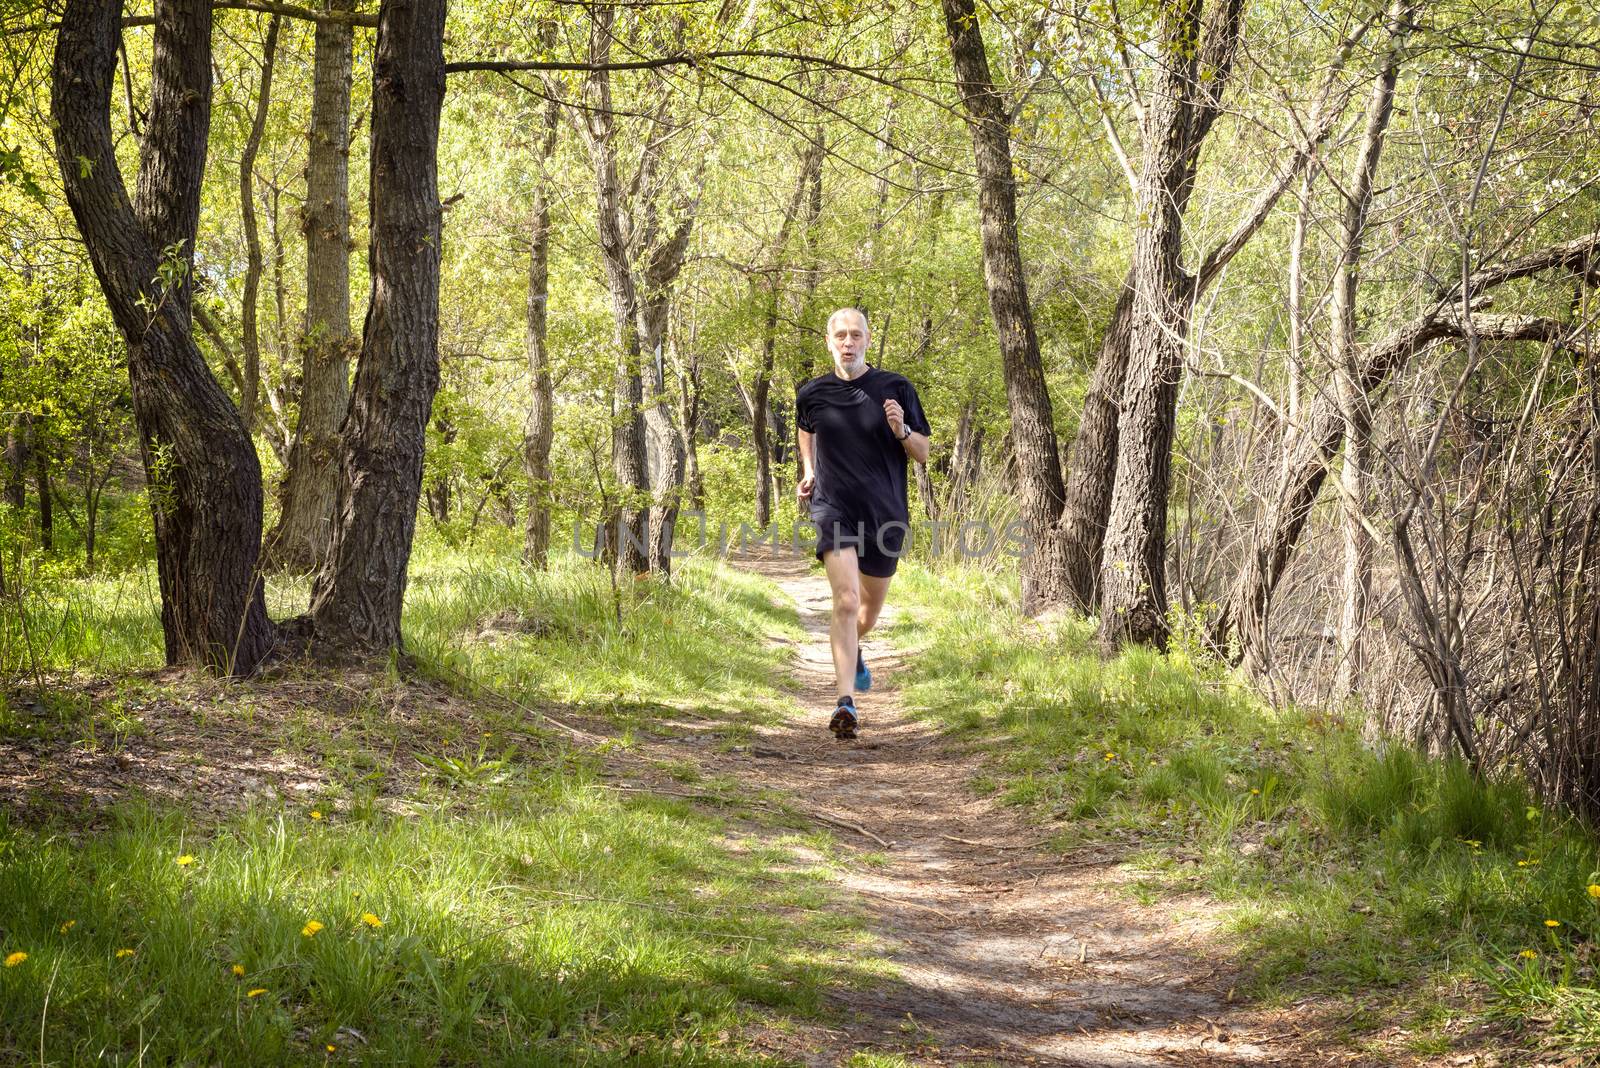 A senior man dressed in black is running in the forest during a warm spring day